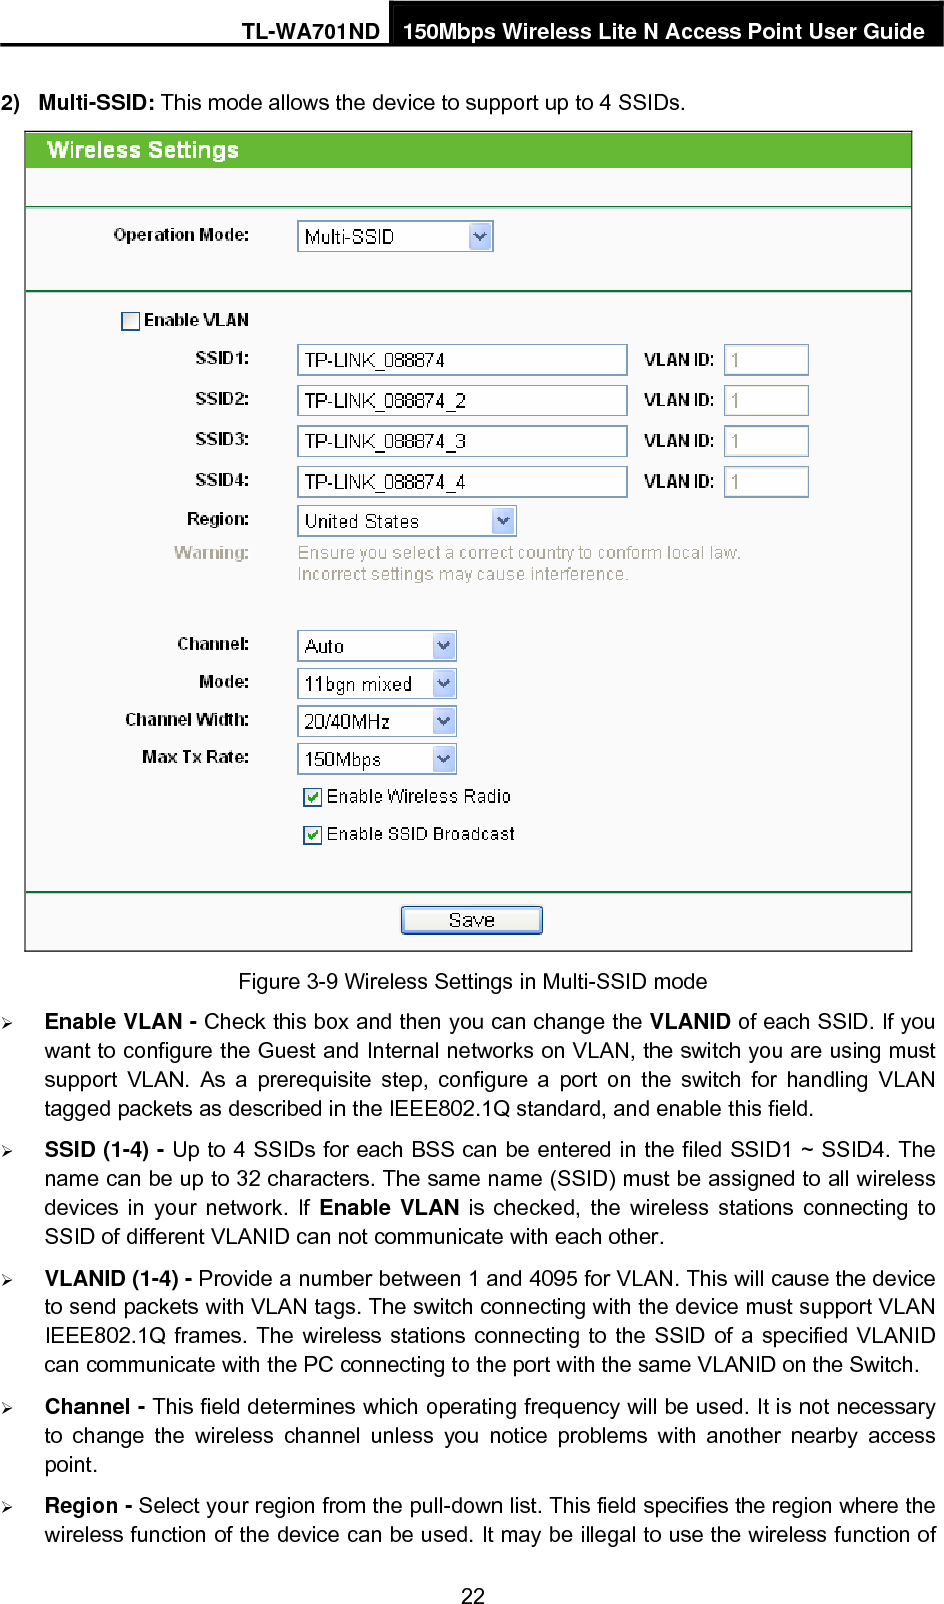 TL-WA701ND 150Mbps Wireless Lite N Access Point User Guide 2) Multi-SSID: This mode allows the device to support up to 4 SSIDs.  Figure 3-9 Wireless Settings in Multi-SSID mode ¾ Enable VLAN - Check this box and then you can change the VLANID of each SSID. If you want to configure the Guest and Internal networks on VLAN, the switch you are using must support VLAN. As a prerequisite step, configure a port on the switch for handling VLAN tagged packets as described in the IEEE802.1Q standard, and enable this field. ¾ SSID (1-4) - Up to 4 SSIDs for each BSS can be entered in the filed SSID1 ~ SSID4. The name can be up to 32 characters. The same name (SSID) must be assigned to all wireless devices in your network. If Enable VLAN is checked, the wireless stations connecting to SSID of different VLANID can not communicate with each other. ¾ VLANID (1-4) - Provide a number between 1 and 4095 for VLAN. This will cause the device to send packets with VLAN tags. The switch connecting with the device must support VLAN IEEE802.1Q frames. The wireless stations connecting to the SSID of a specified VLANID can communicate with the PC connecting to the port with the same VLANID on the Switch. ¾ Channel - This field determines which operating frequency will be used. It is not necessary to change the wireless channel unless you notice problems with another nearby access point. ¾ Region - Select your region from the pull-down list. This field specifies the region where the wireless function of the device can be used. It may be illegal to use the wireless function of 22 